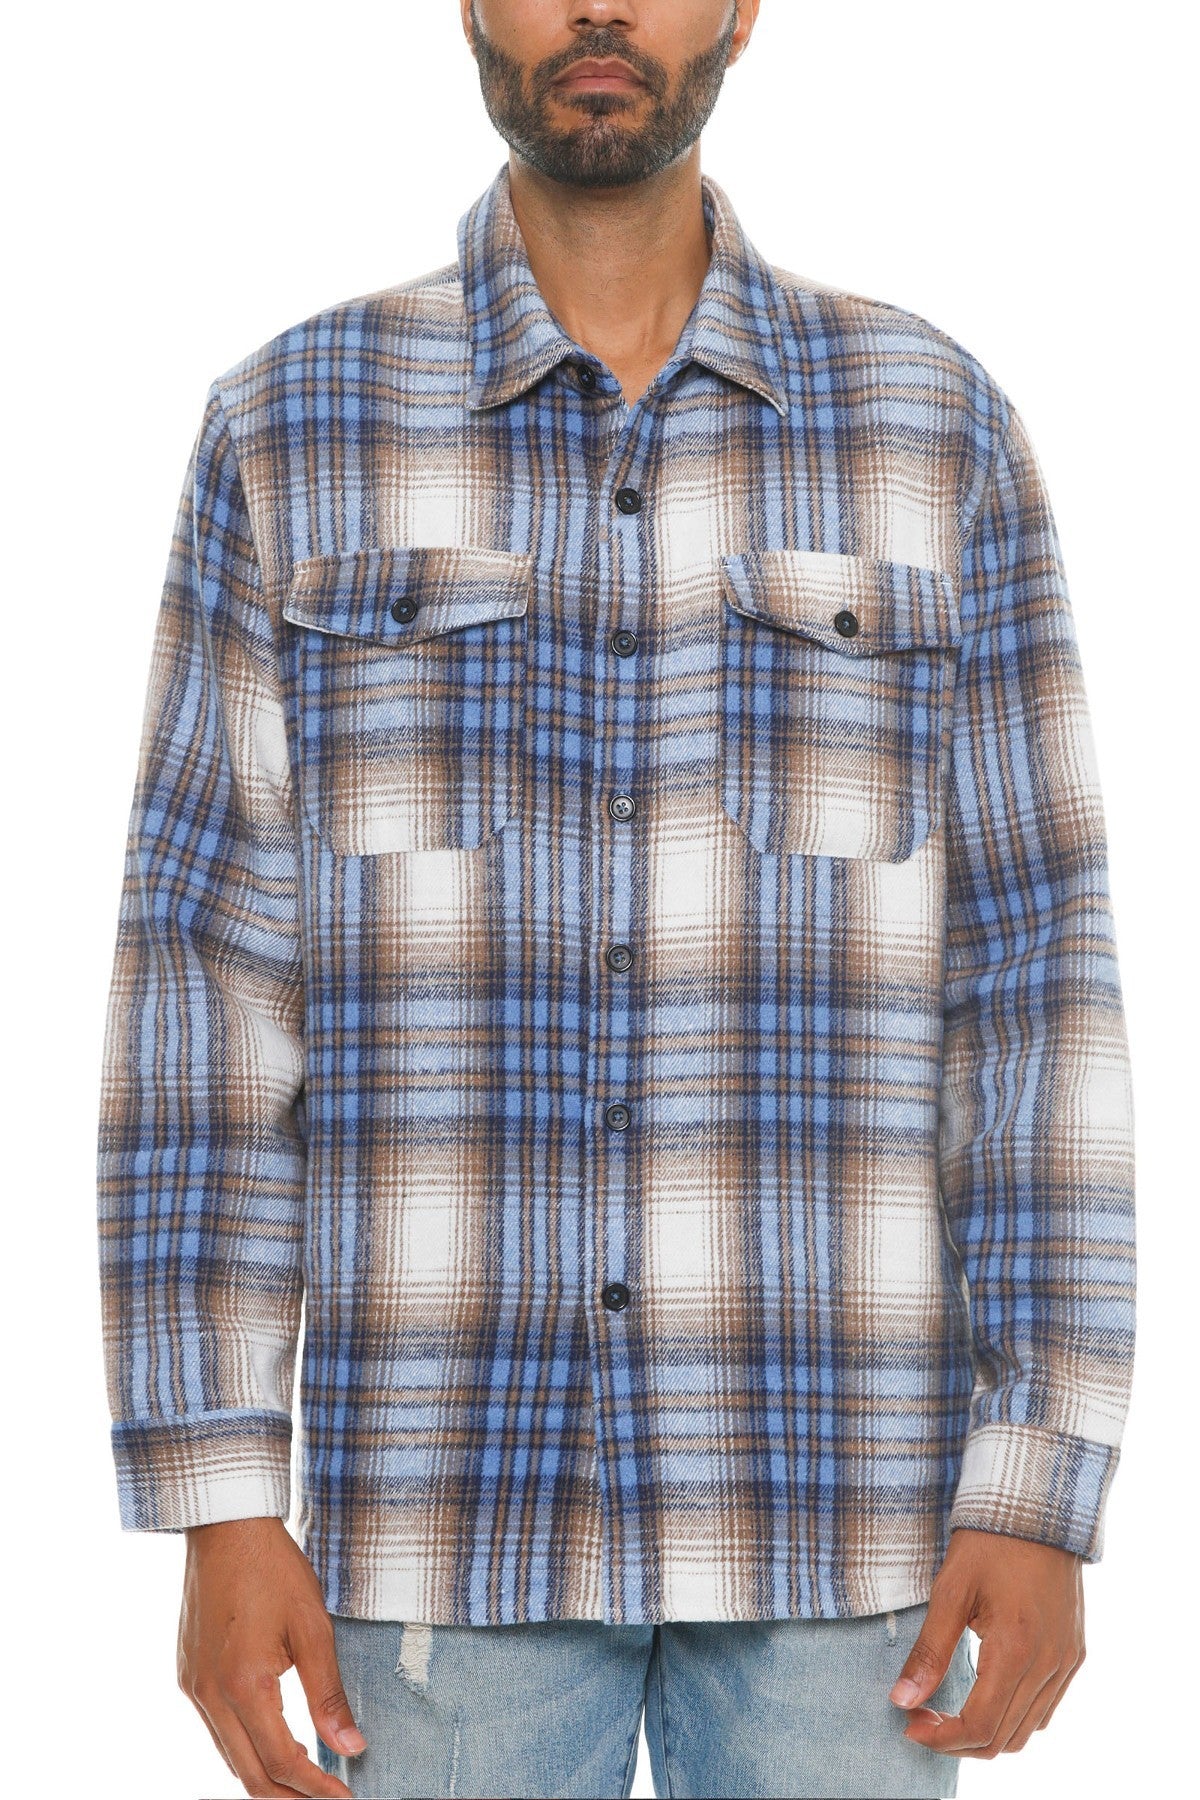 Blue Sand Men's Checkered Soft Flannel Shacket - 8 colors - men's button-up shirt at TFC&H Co.